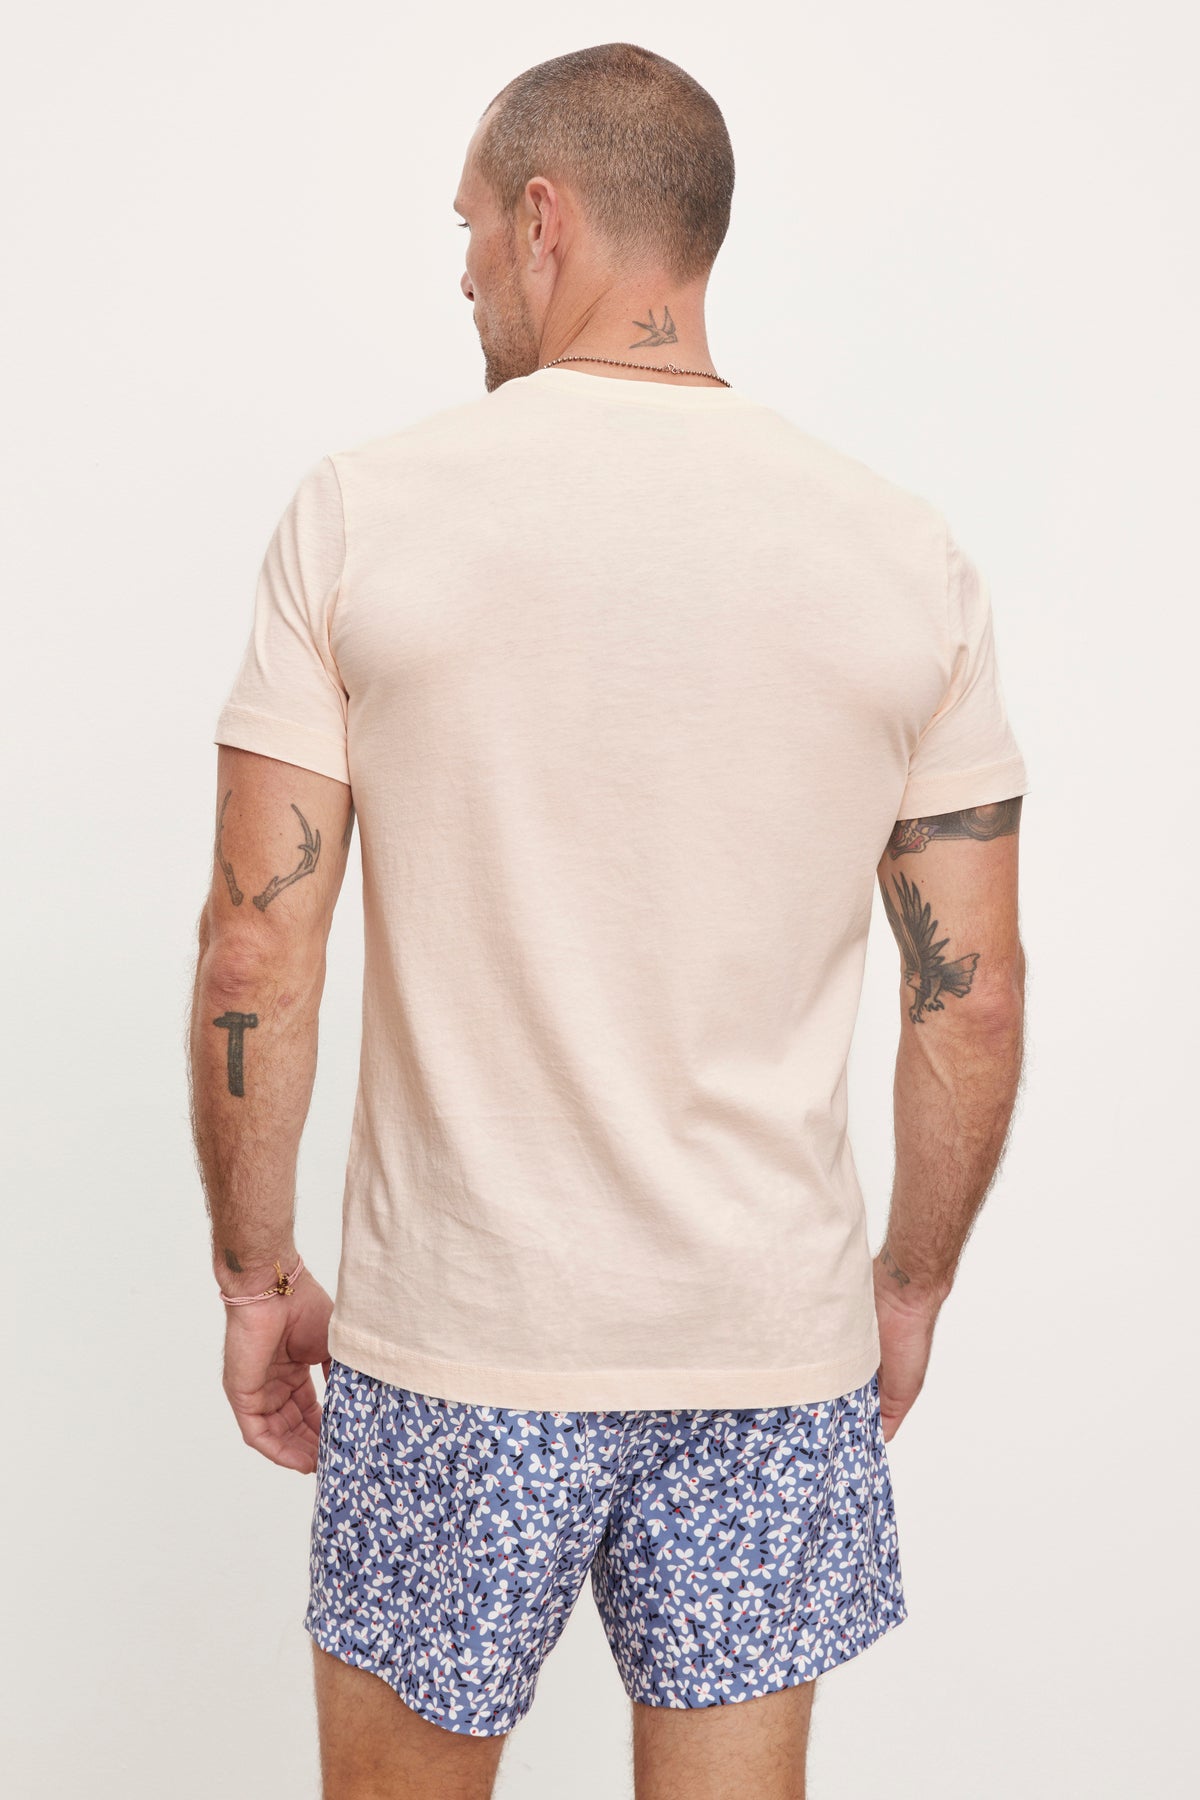 A man in a Velvet by Graham & Spencer RANDY CREW NECK TEE and blue patterned shorts stands facing away from the camera, showing visible tattoos on his arms and neck.-36753568563393